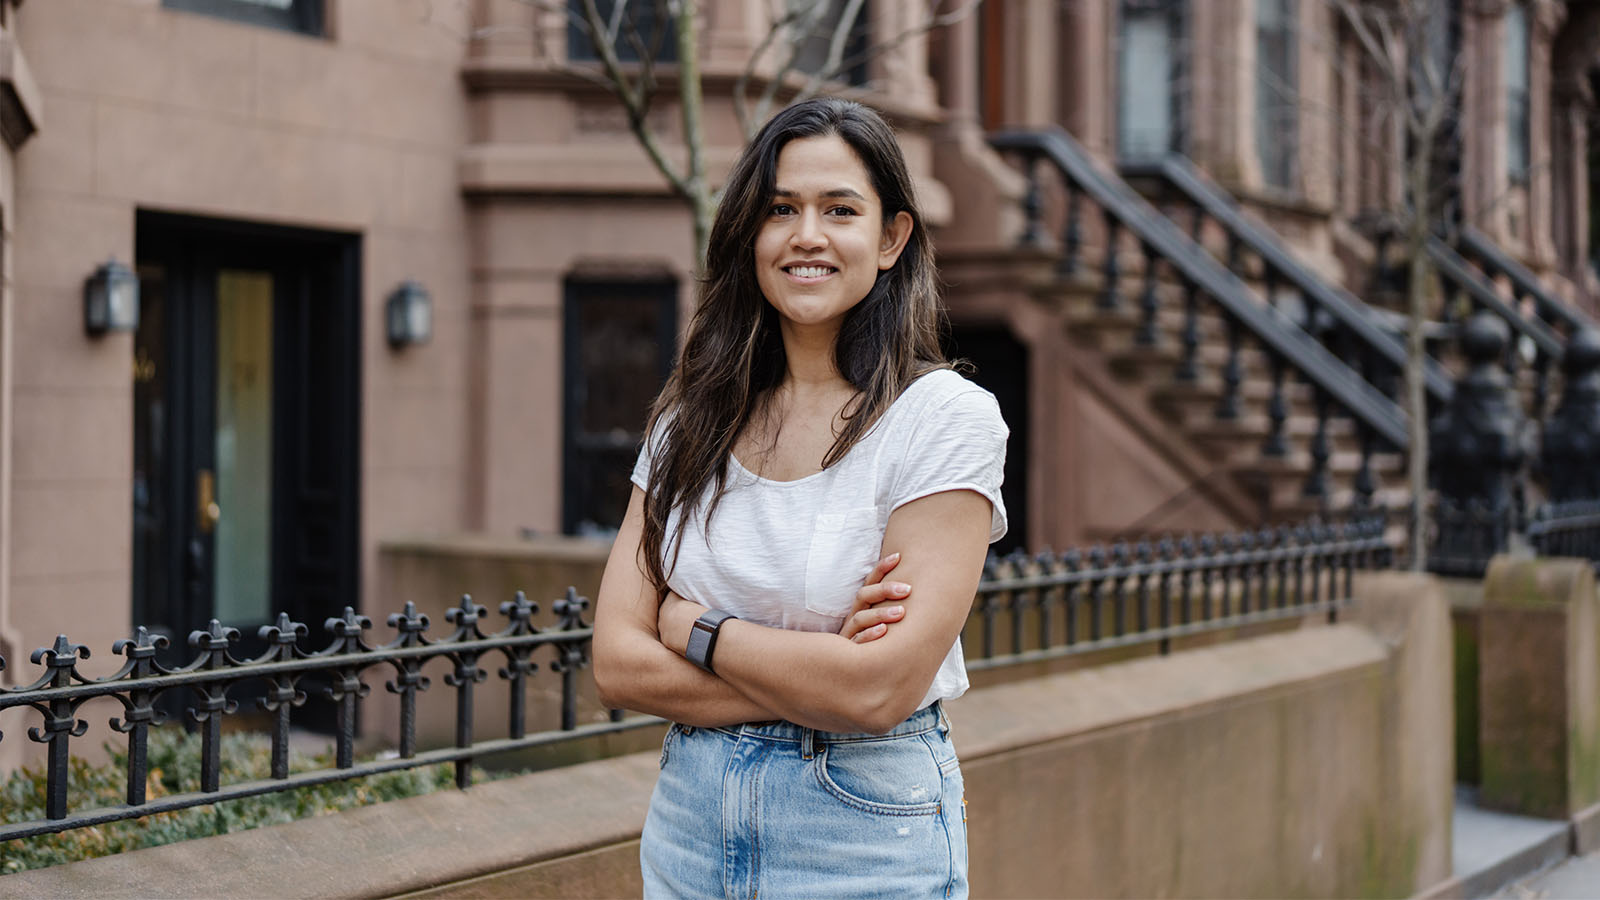 A woman with a white shirt and blue jeans is standing in front of a NYC brownstone building with her arms crossed, smiling